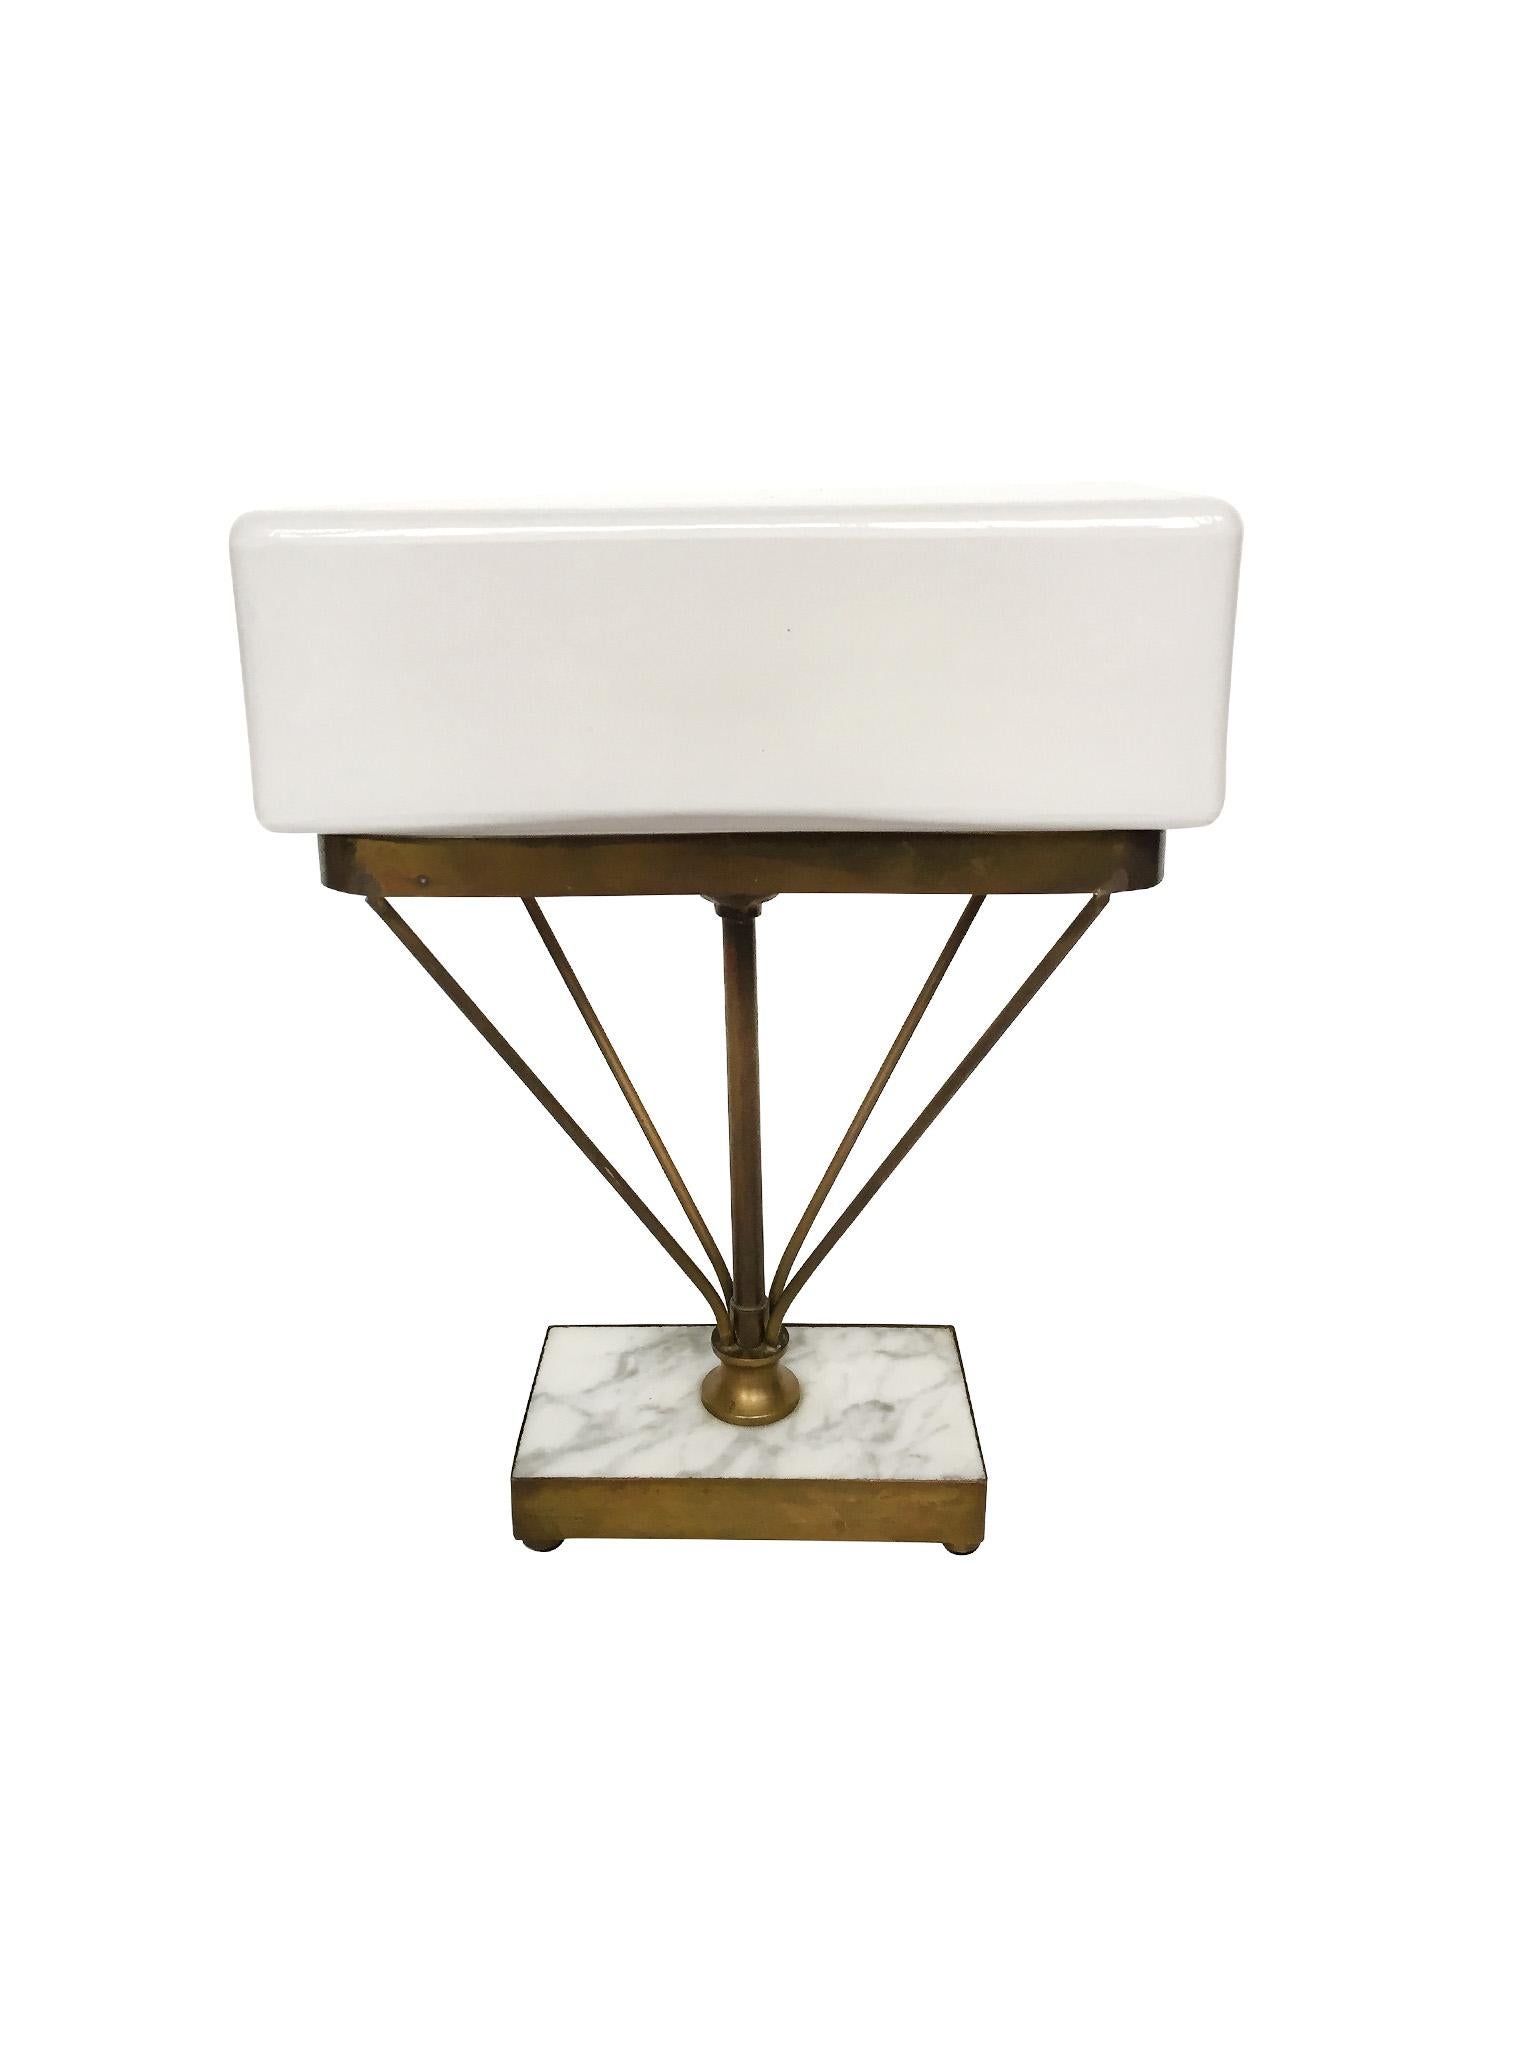 This small table lamp was created in the 1930s in the manner of the Art Deco and modernist architect and designer, Jacques Adnet, renowned for his luxe and minimal designs in metal and glass. This particular table lamp emulates Adnet's use of simple